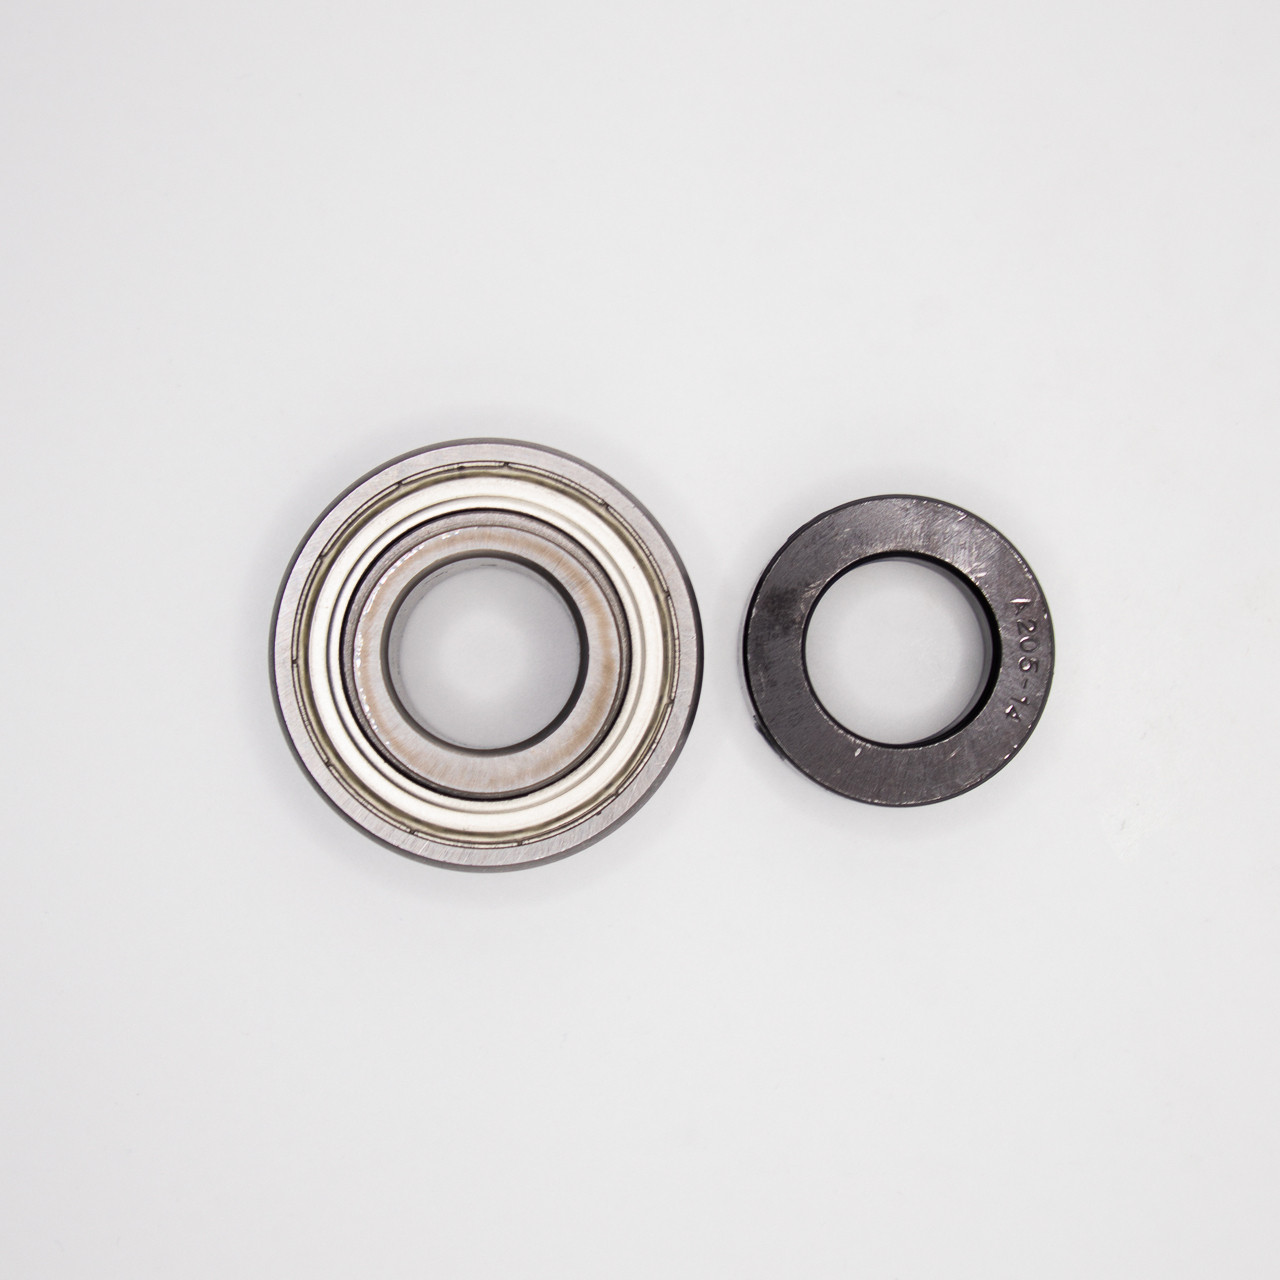 CSA207-21 Insert Ball Bearing 1-5/16x72x38.9 Separated Front View